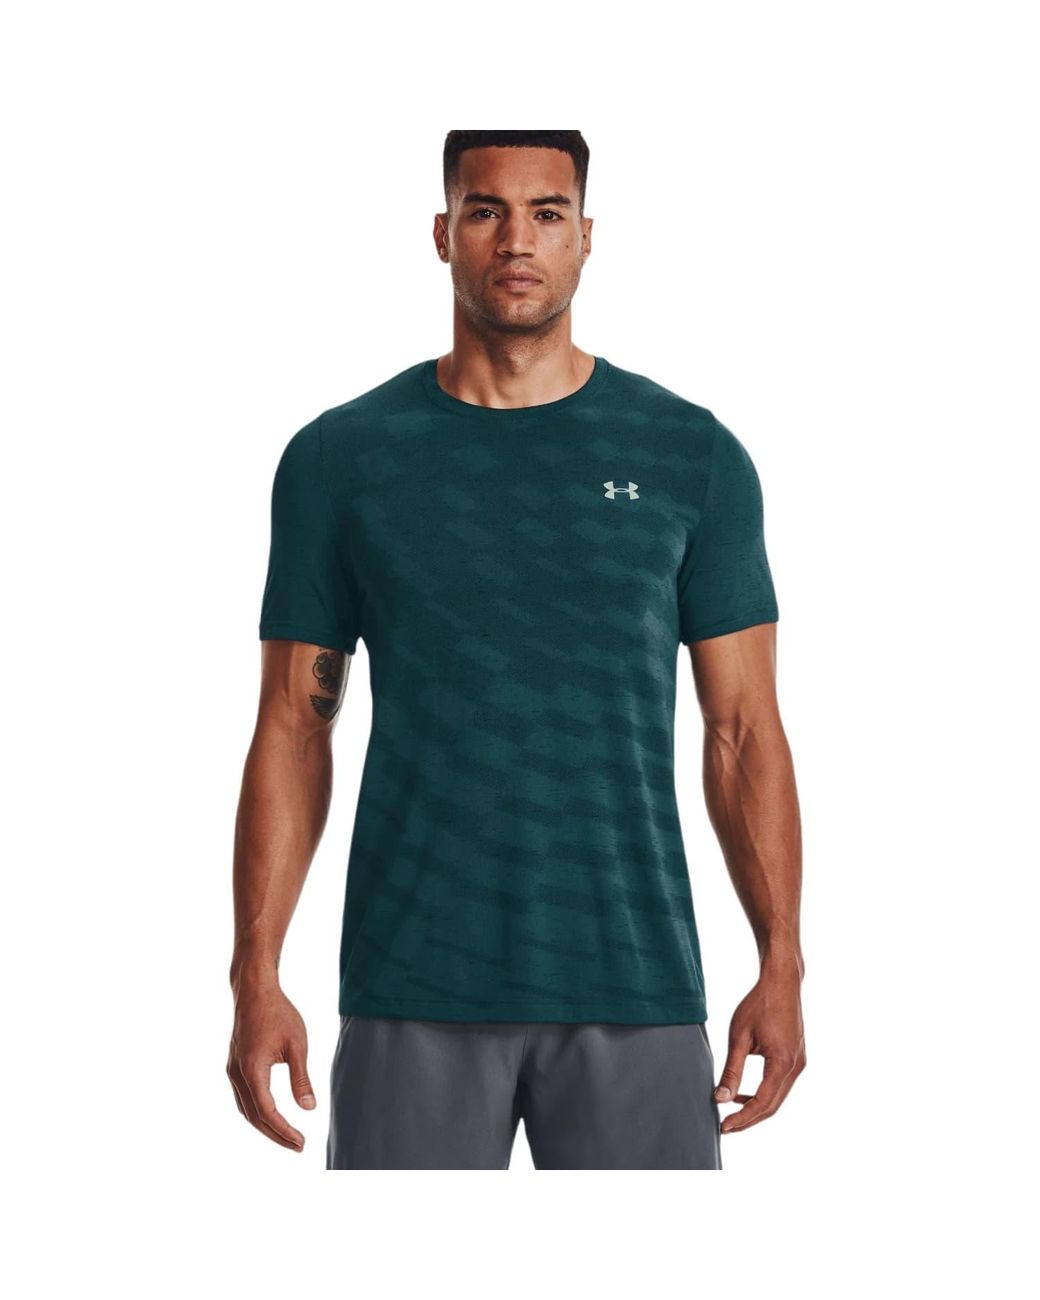 Under Armour T-shirt Seamless Radial Uomo Tourmaline Teal / Opal Green for  Men | Lyst